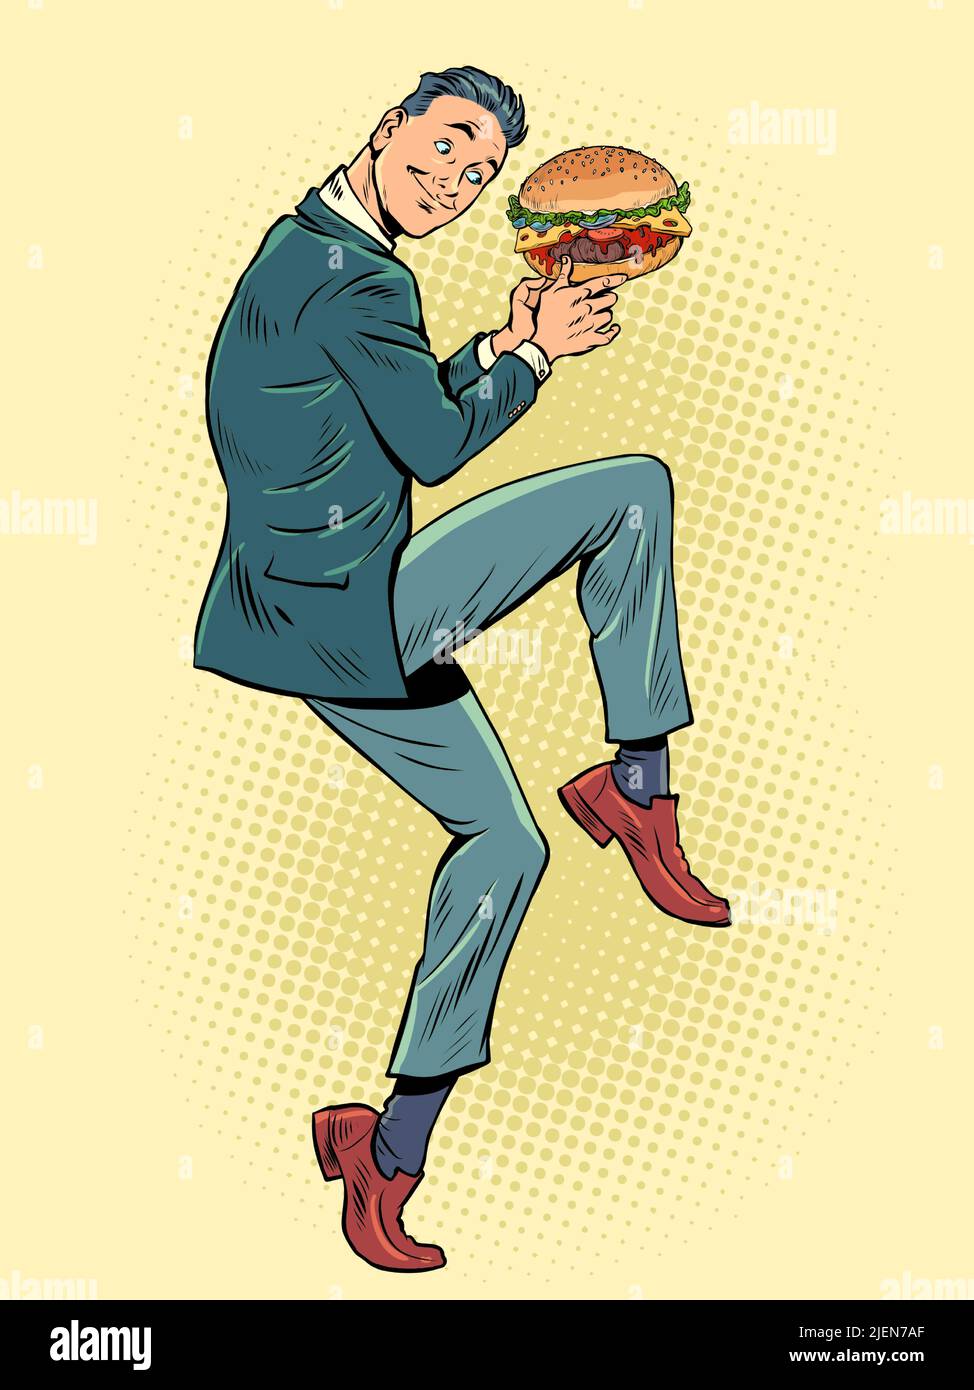 Businessman in a funny pose. whopper burger in hands, street food. pop art retro vector illustration kitsch vintage 50s 60s style Stock Vector